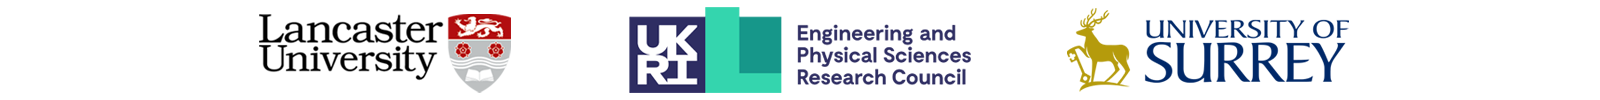 Lancaster University, Engineering and Physical Science Research Council, University of Surrey